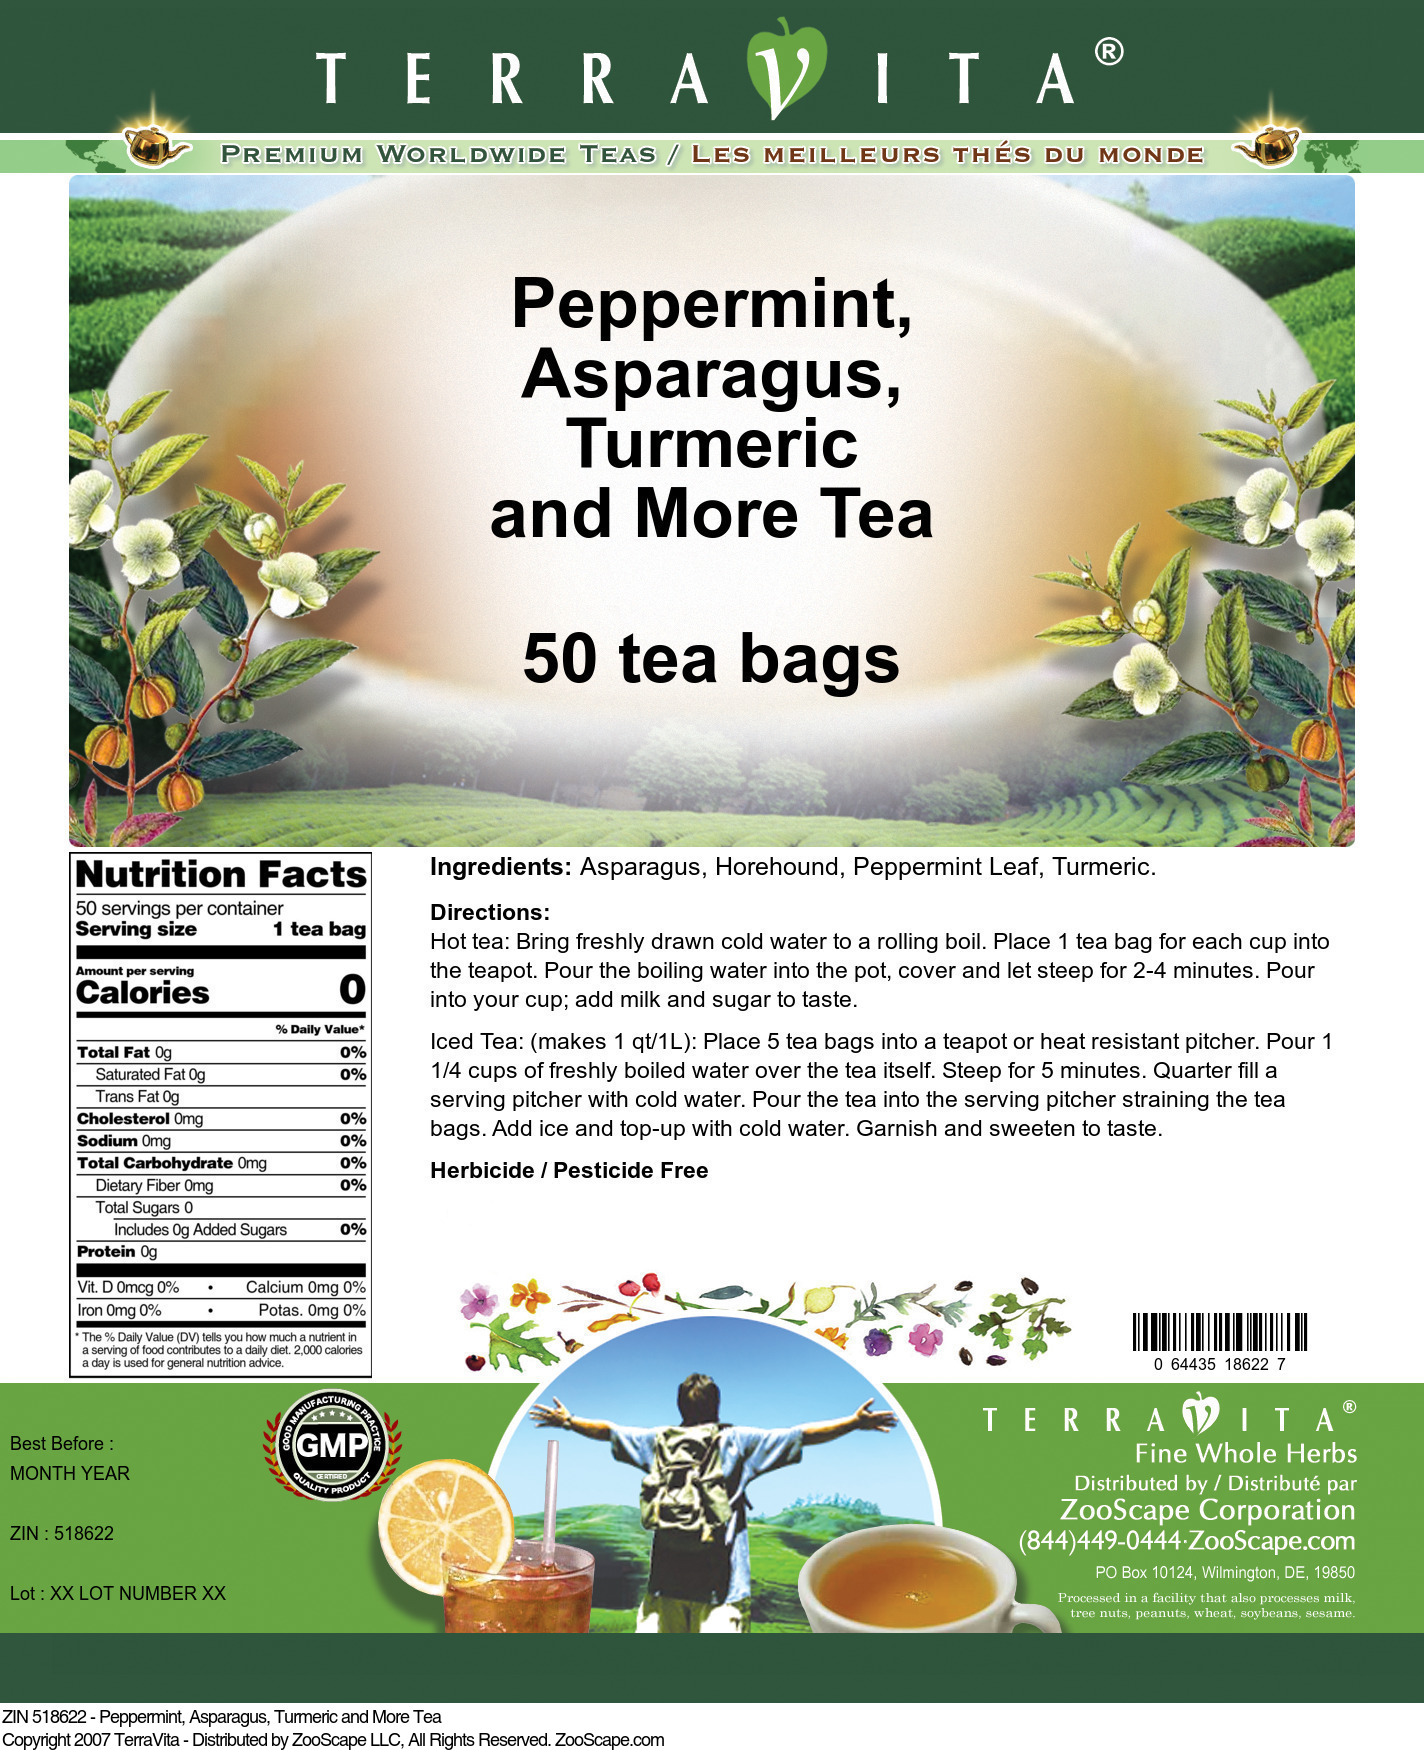 Peppermint, Asparagus, Turmeric and More Tea - Label